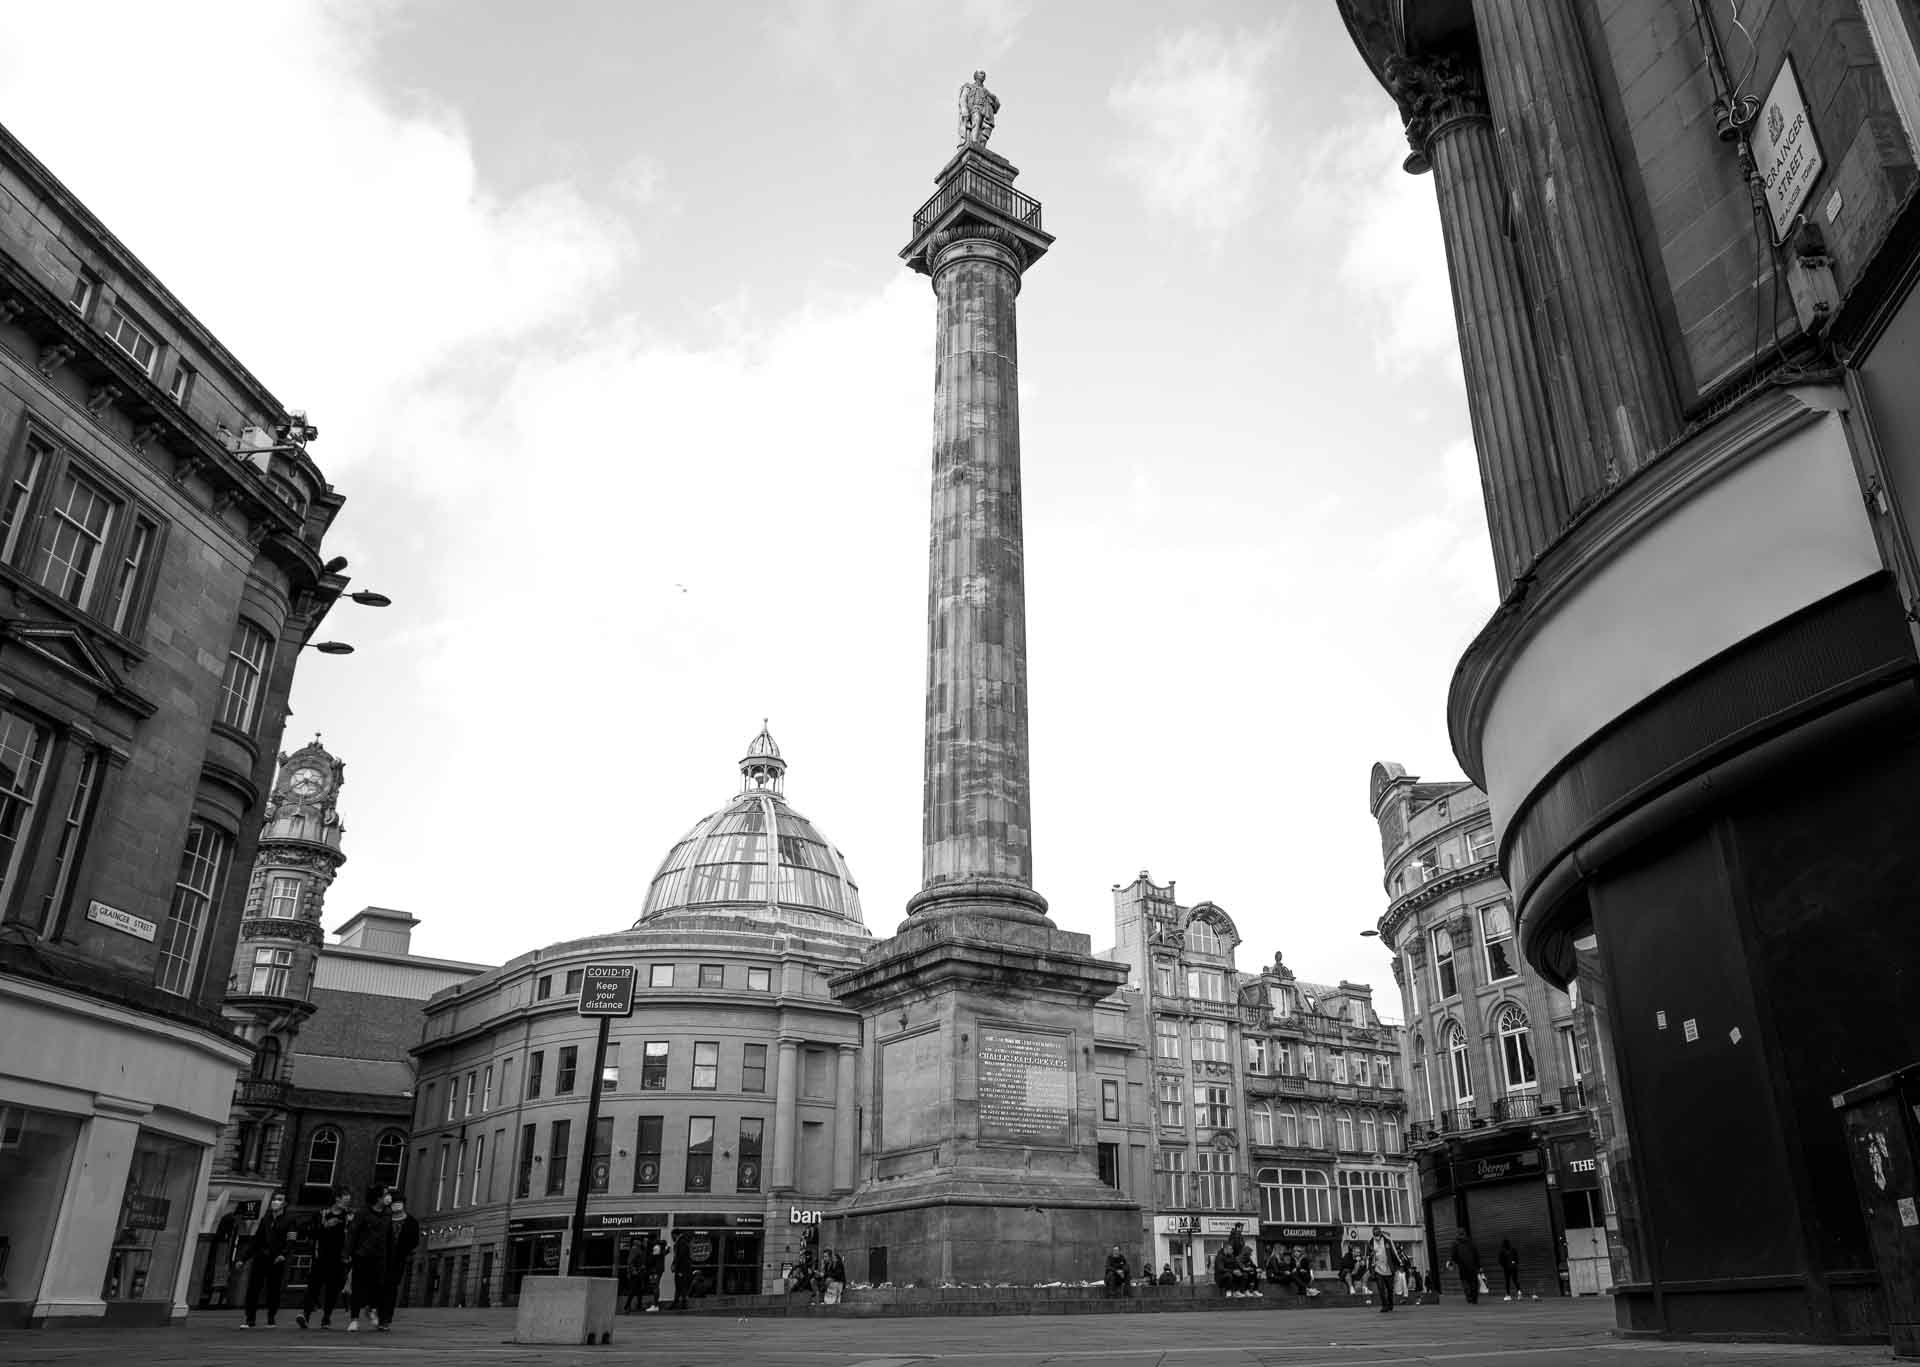 Greyscale image of Grey's Monument close to PREMIER SUITES Newcastle